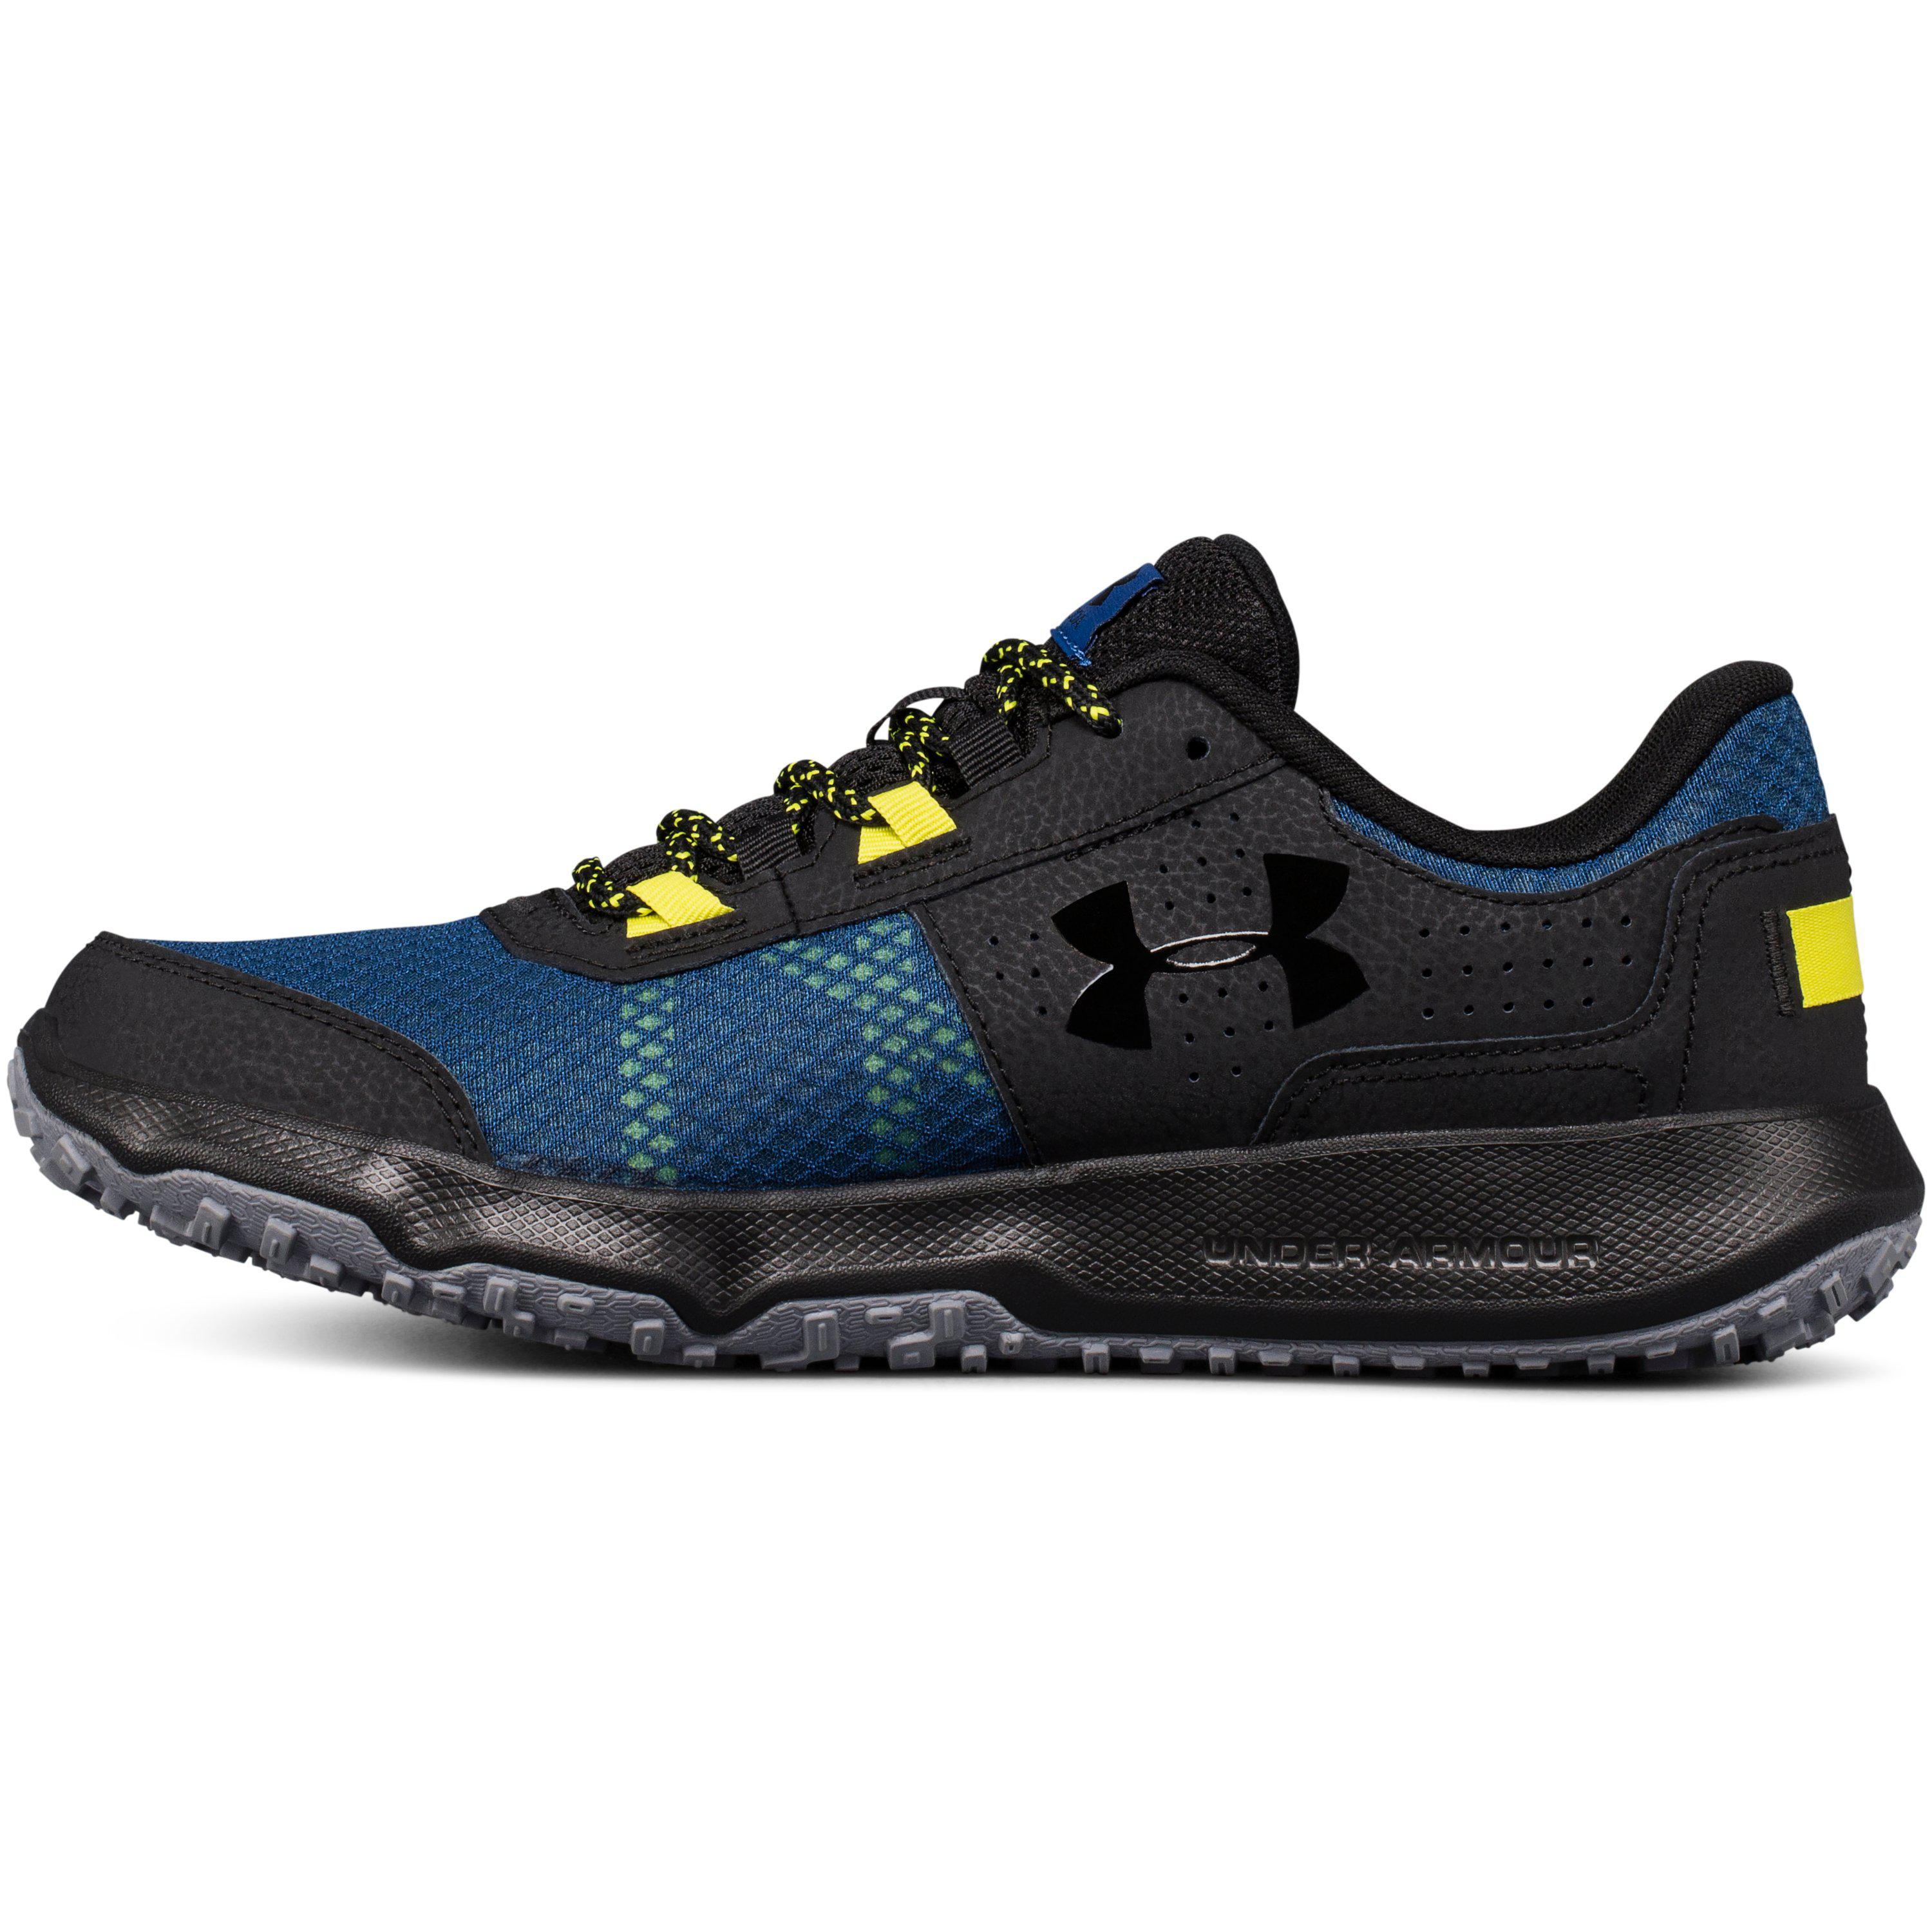 Under Armour Toccoa 4e Best Buy, 56% OFF | evanstoncinci.org